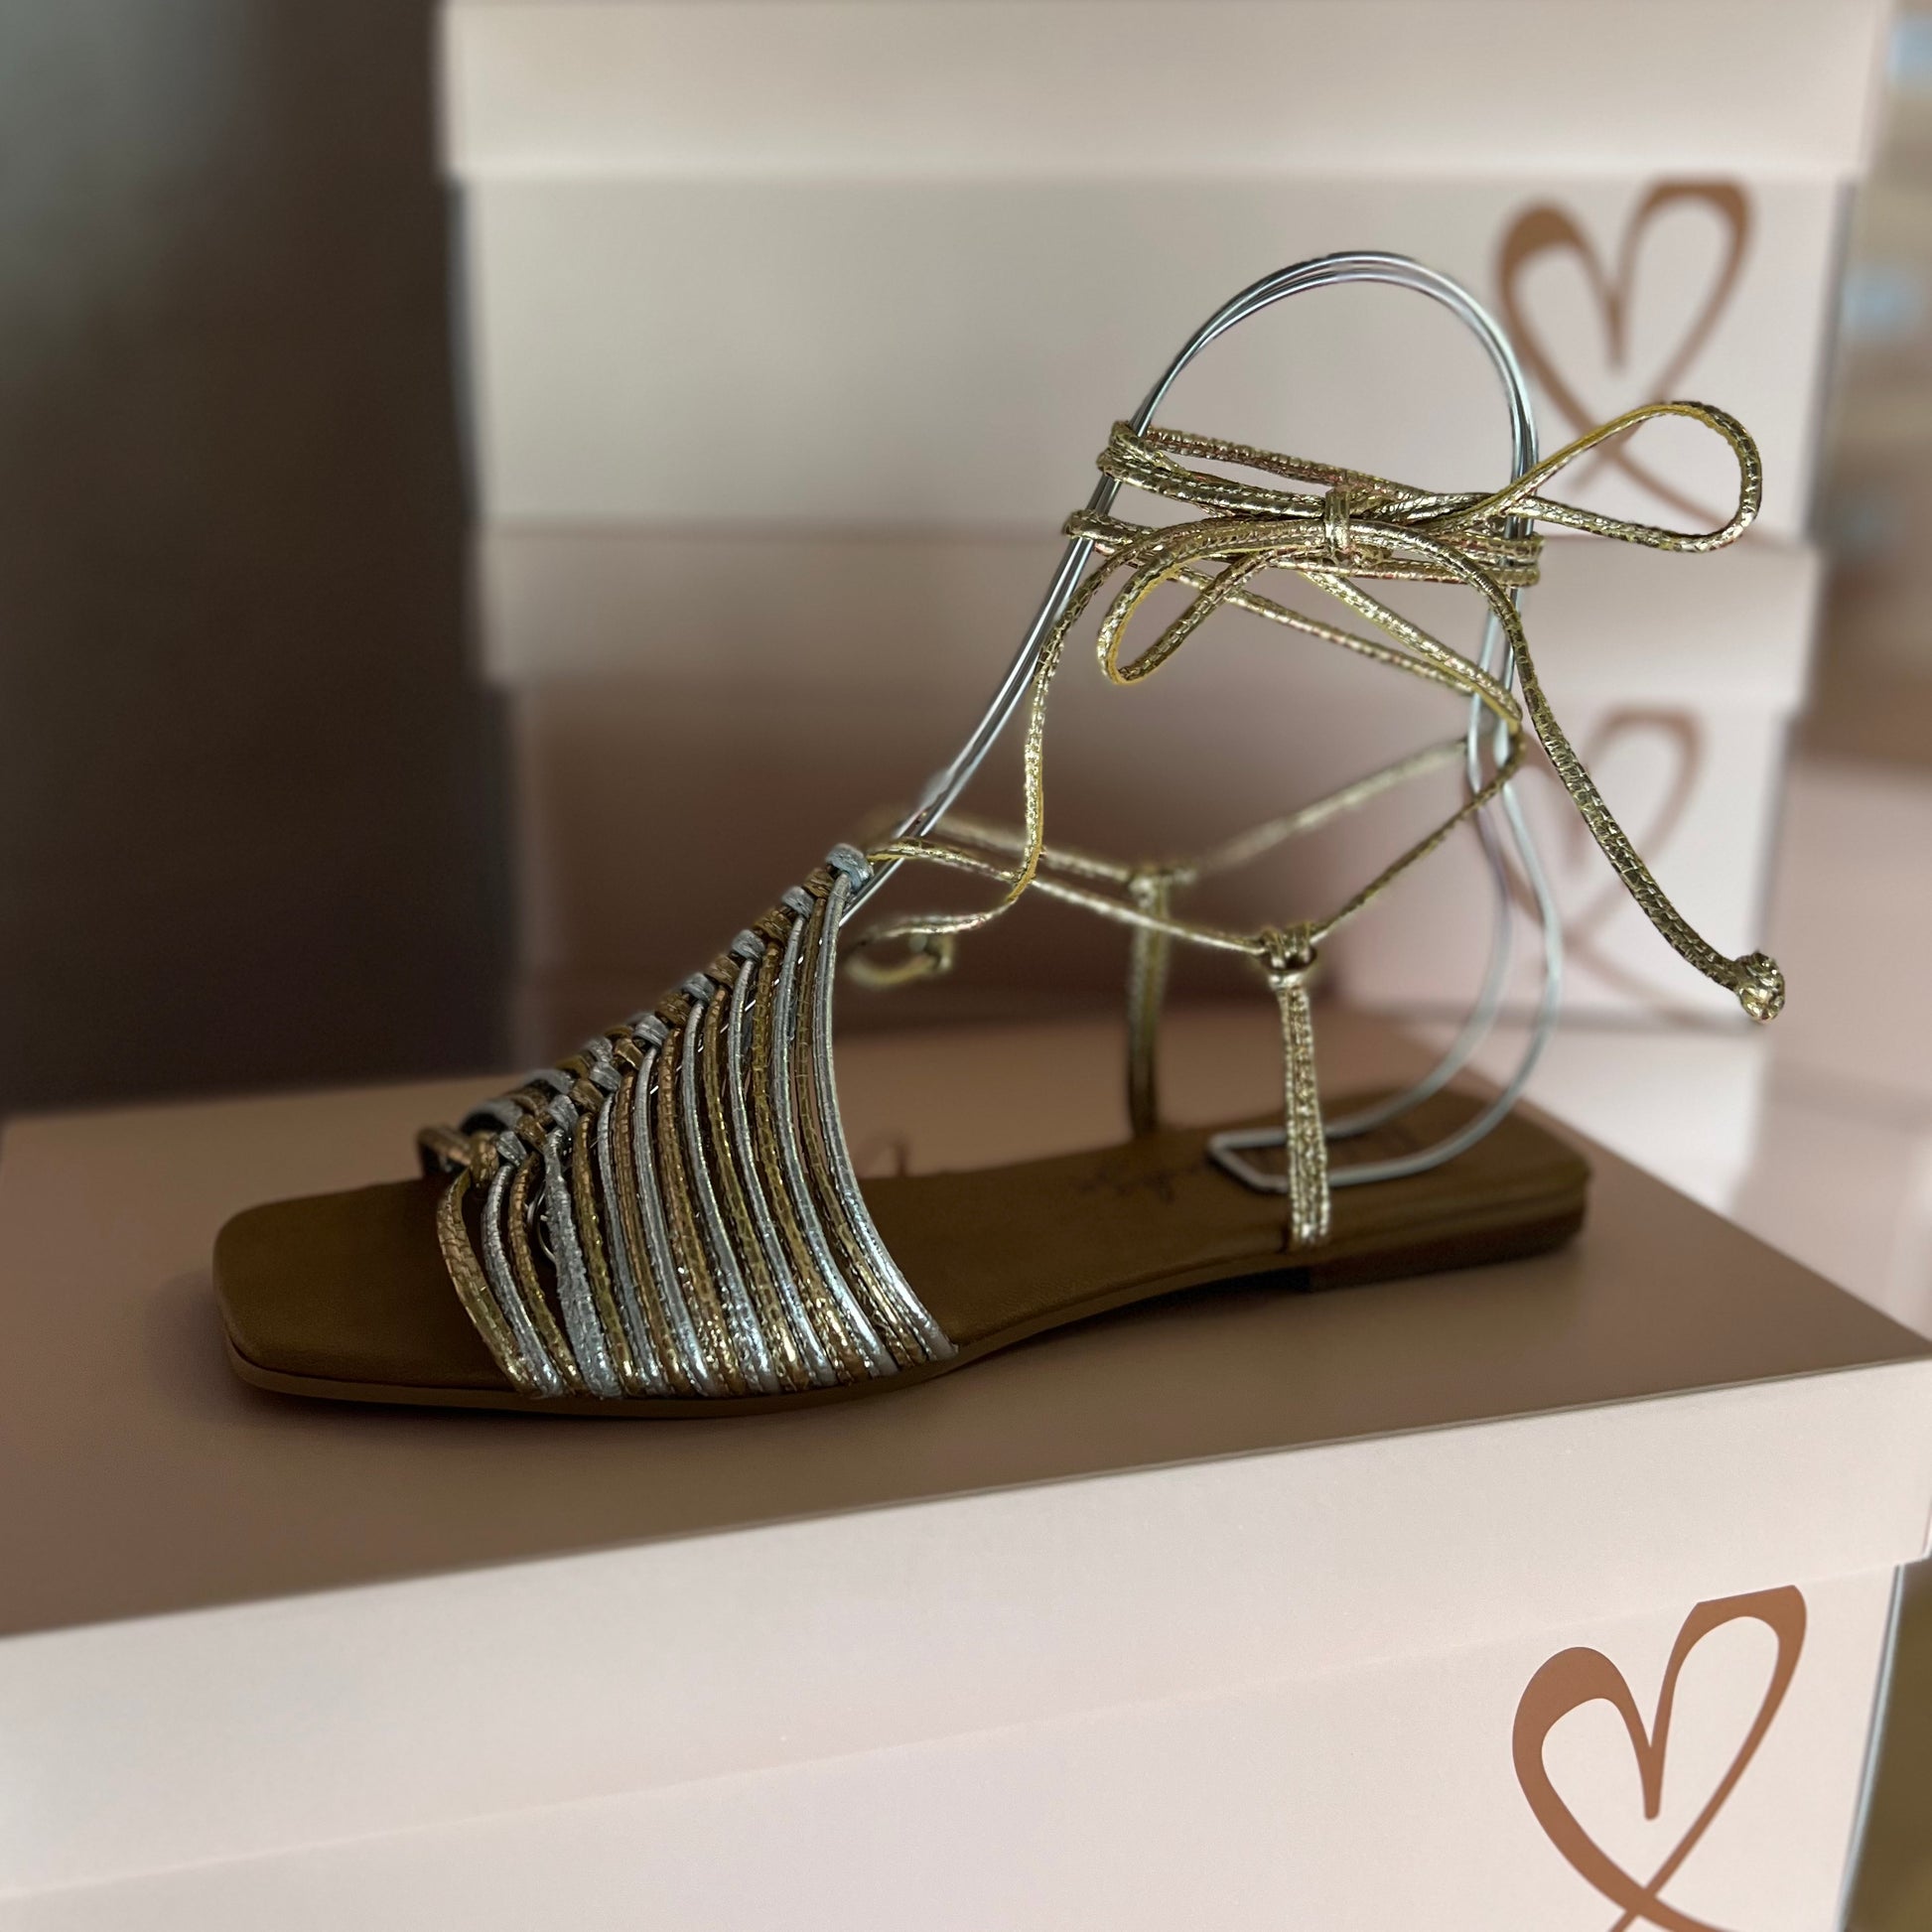 Eva Sandals by Nataly Mendez FEATURES Upper material made of genuine leather Genuine leather lining Flexible rubber sole Heel height .5 cm Handmade